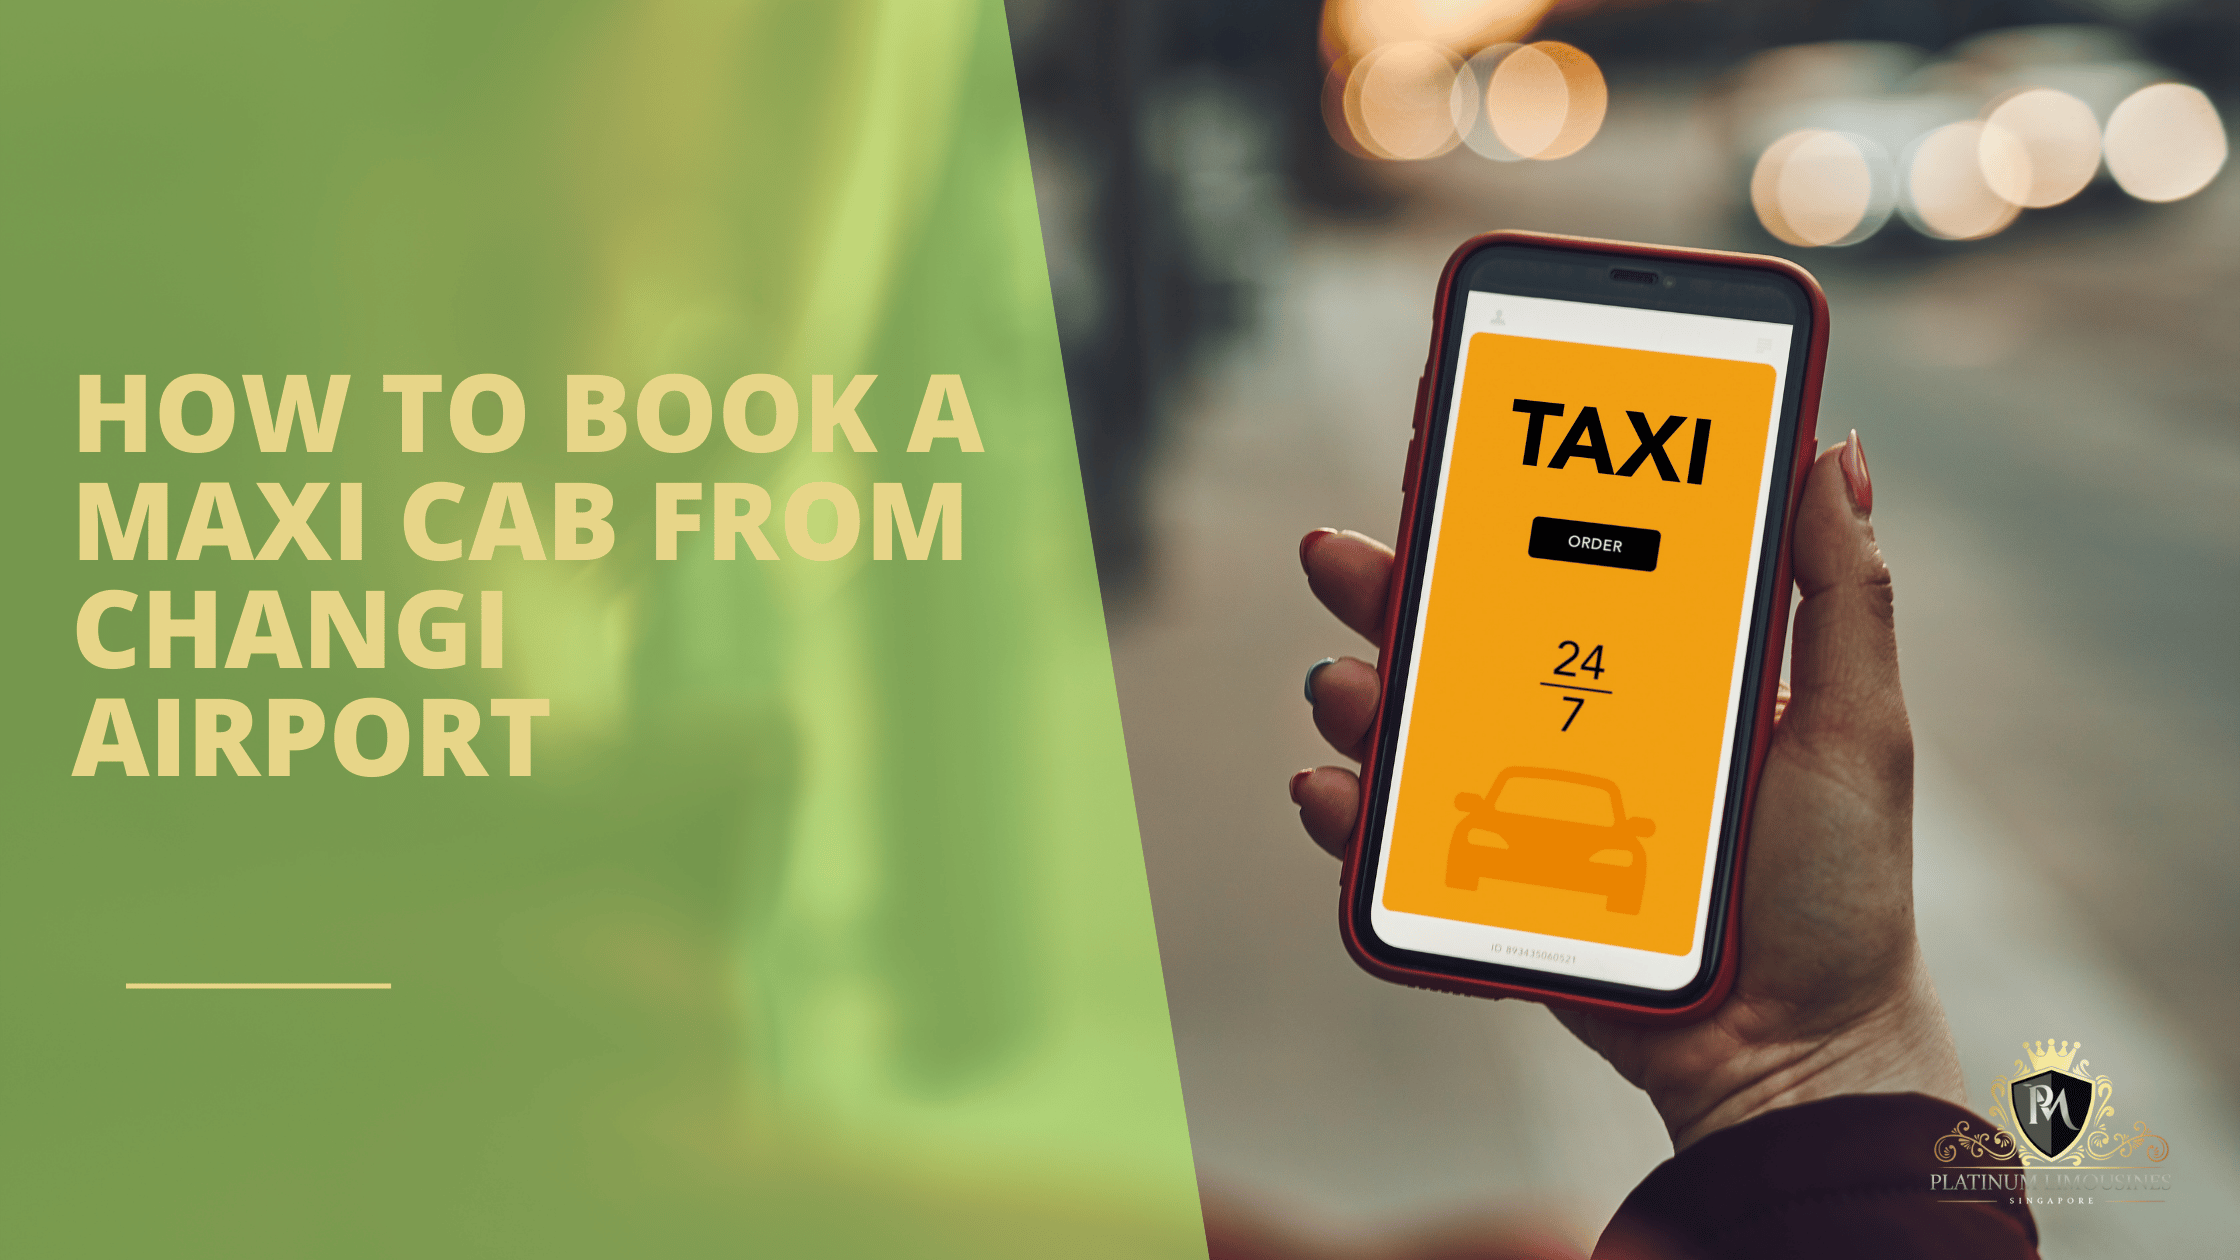 How to Book Maxi Cab from Changi Airport?